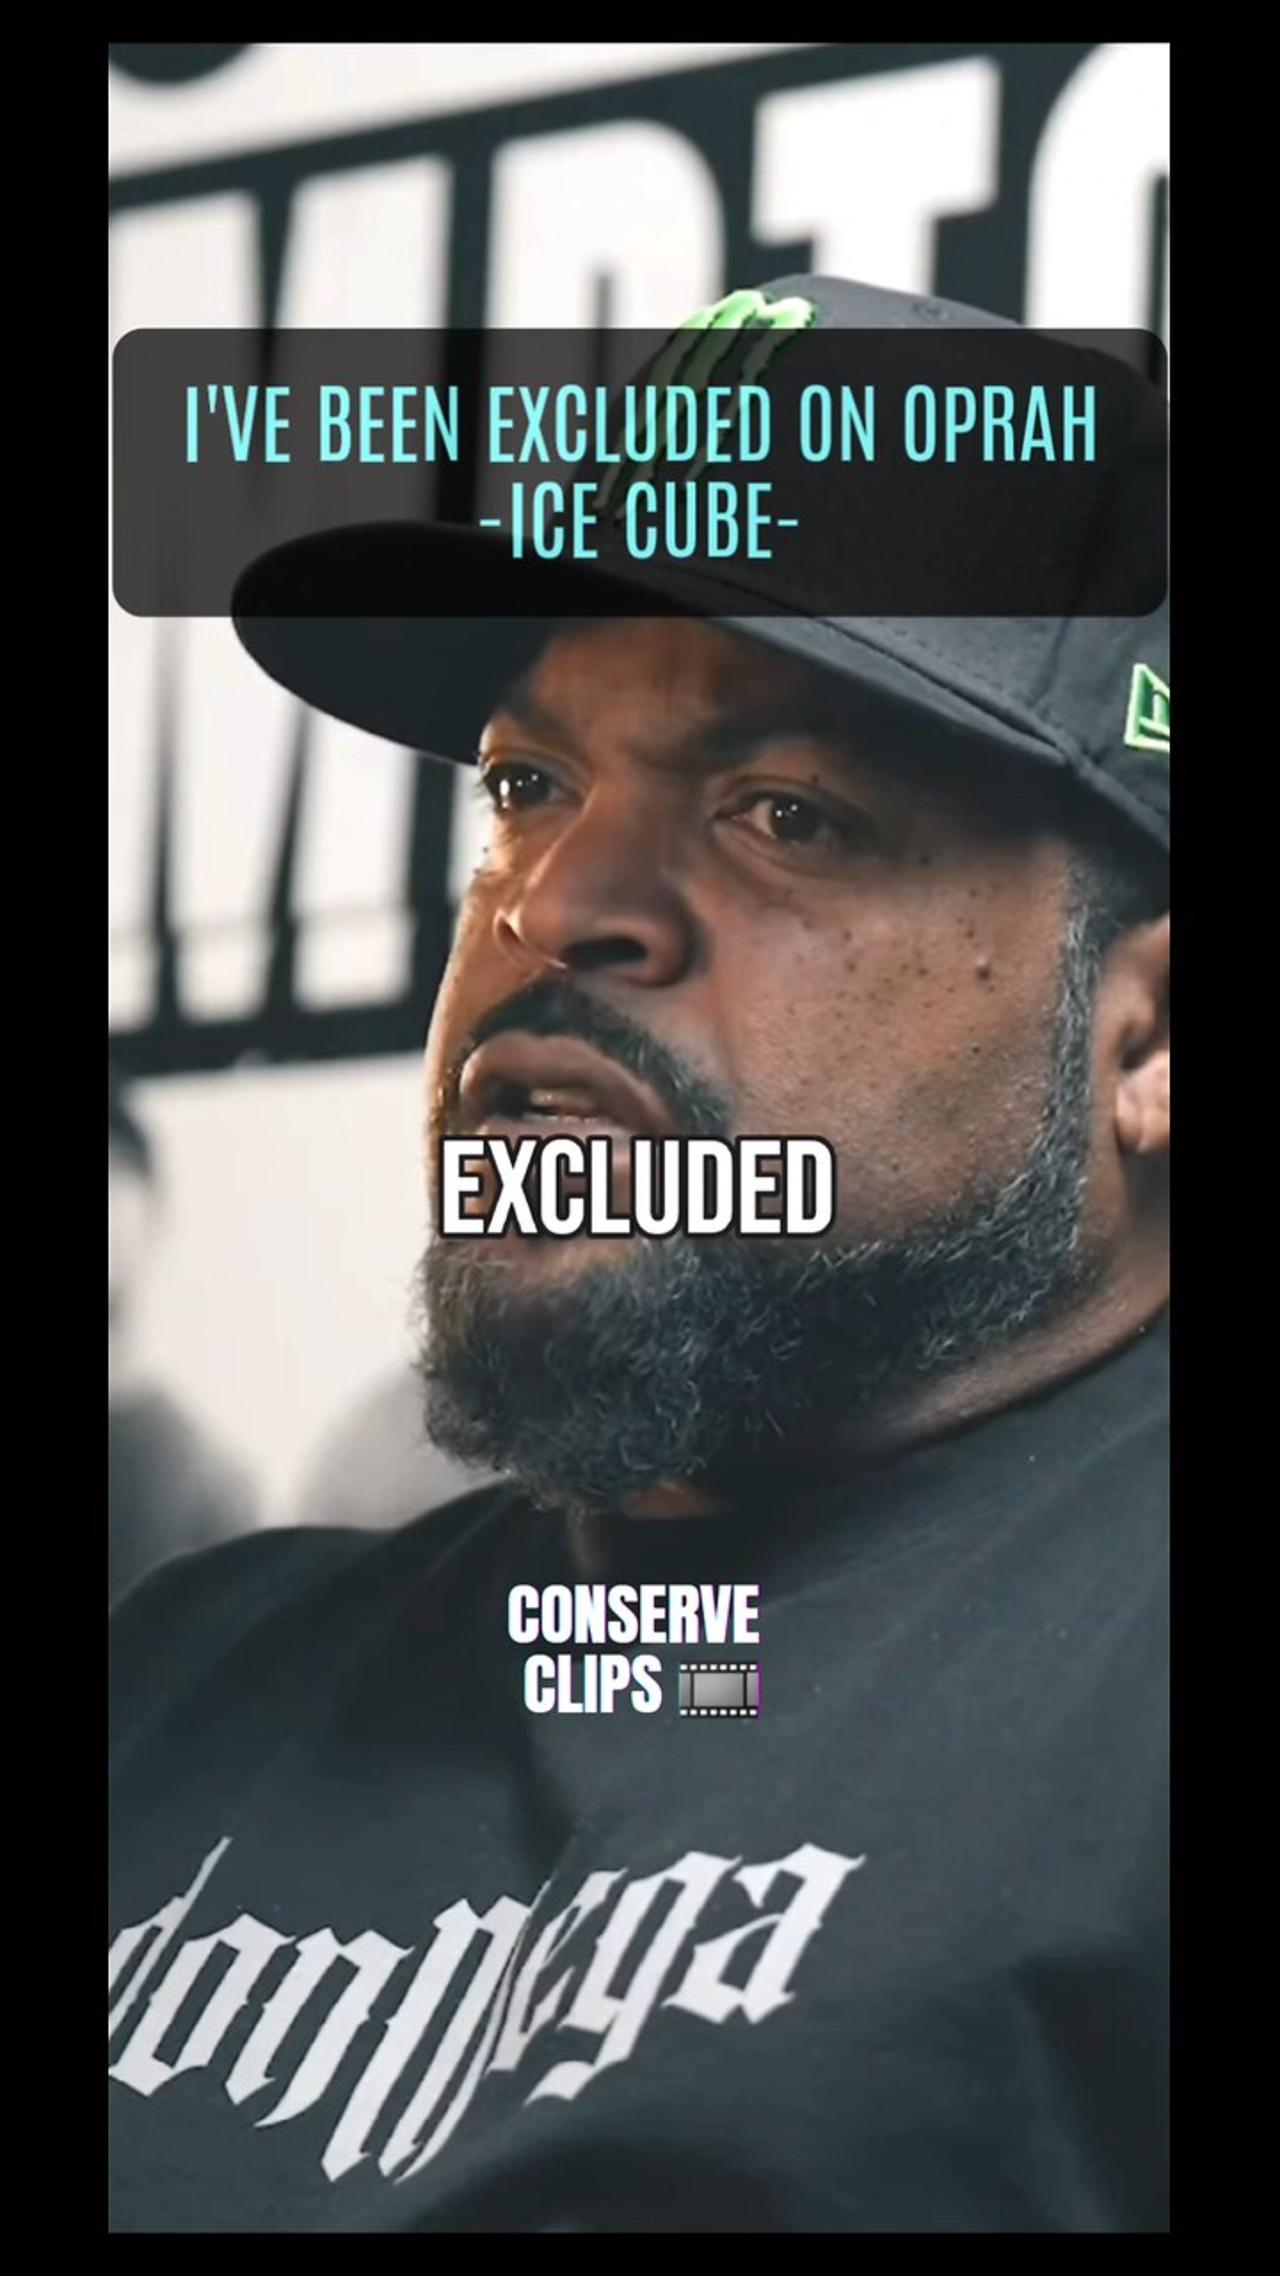 ICE CUBE: I'VE BEEN EXCLUDED ON OPRAH.